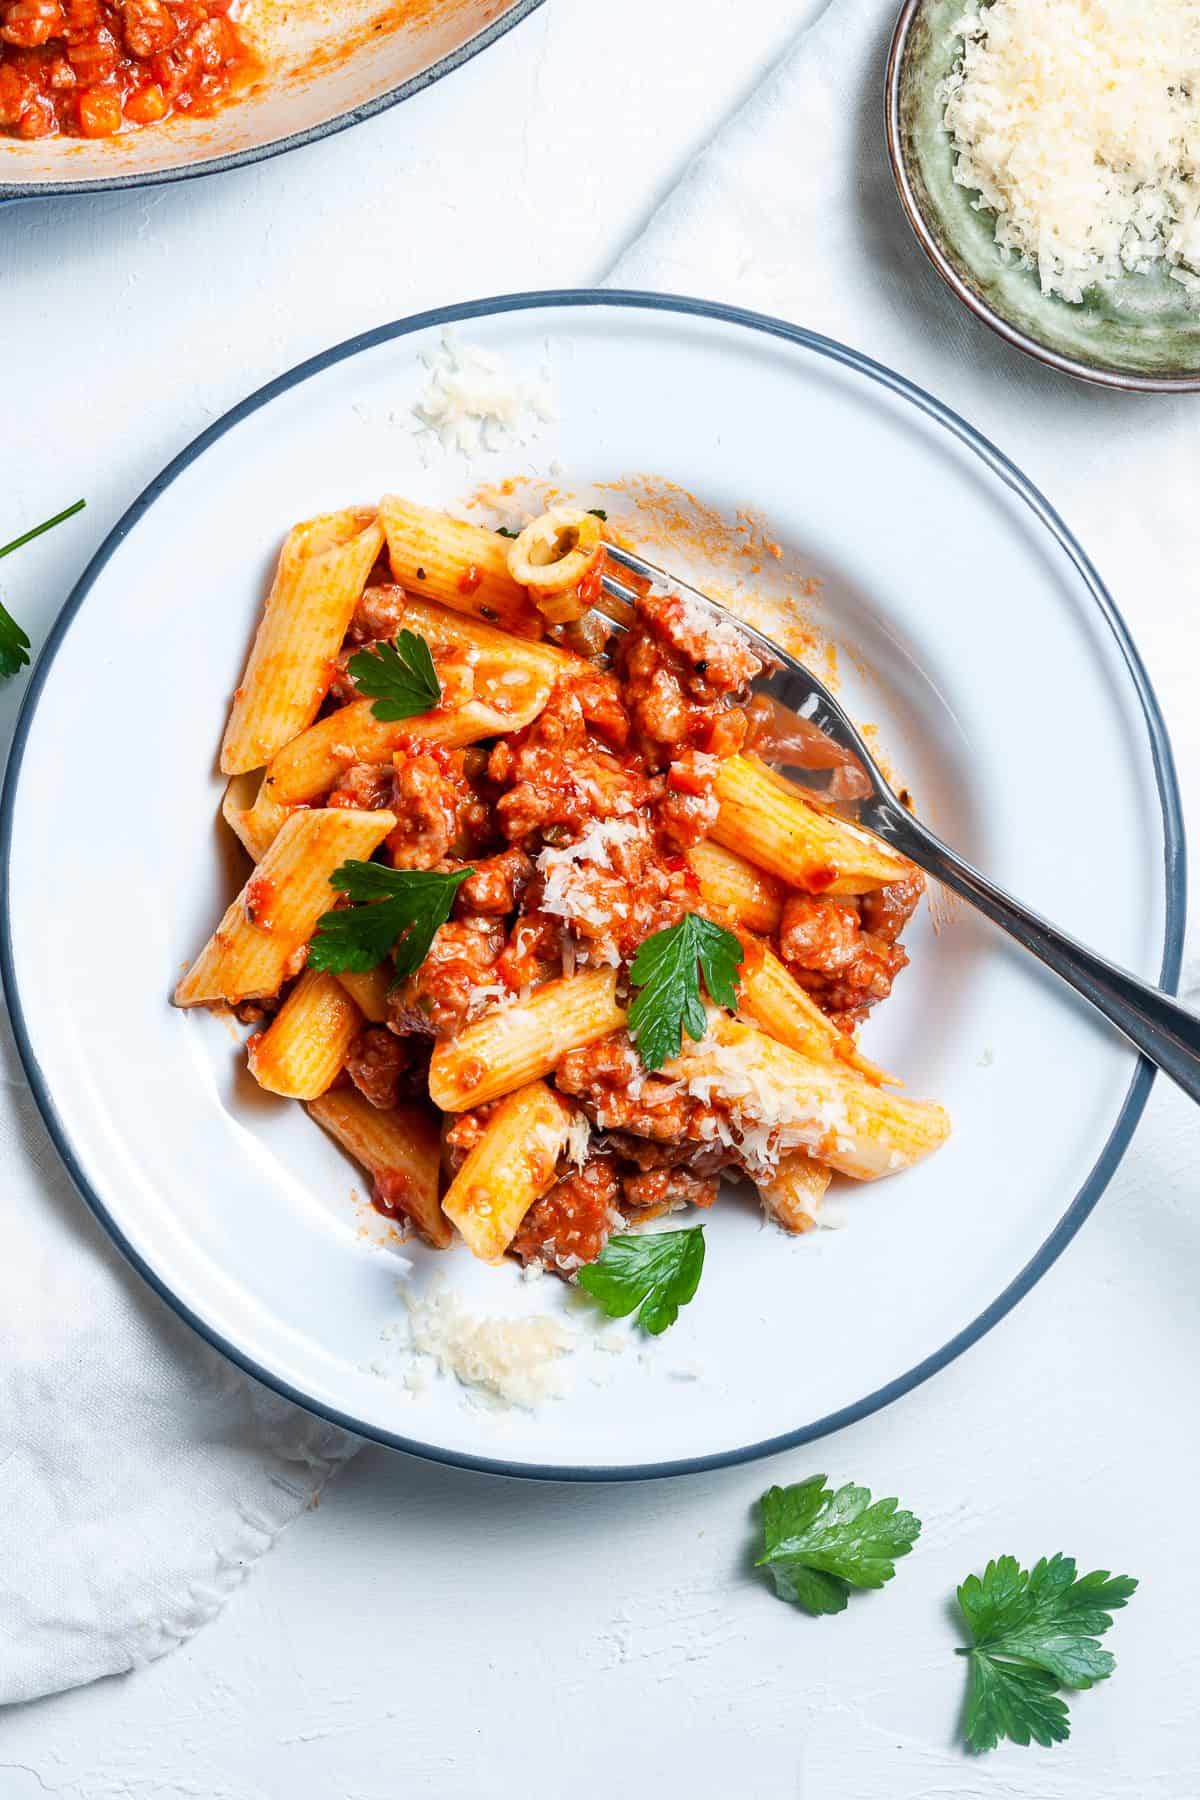 Dish of penne pasta, tossed in the ragu.